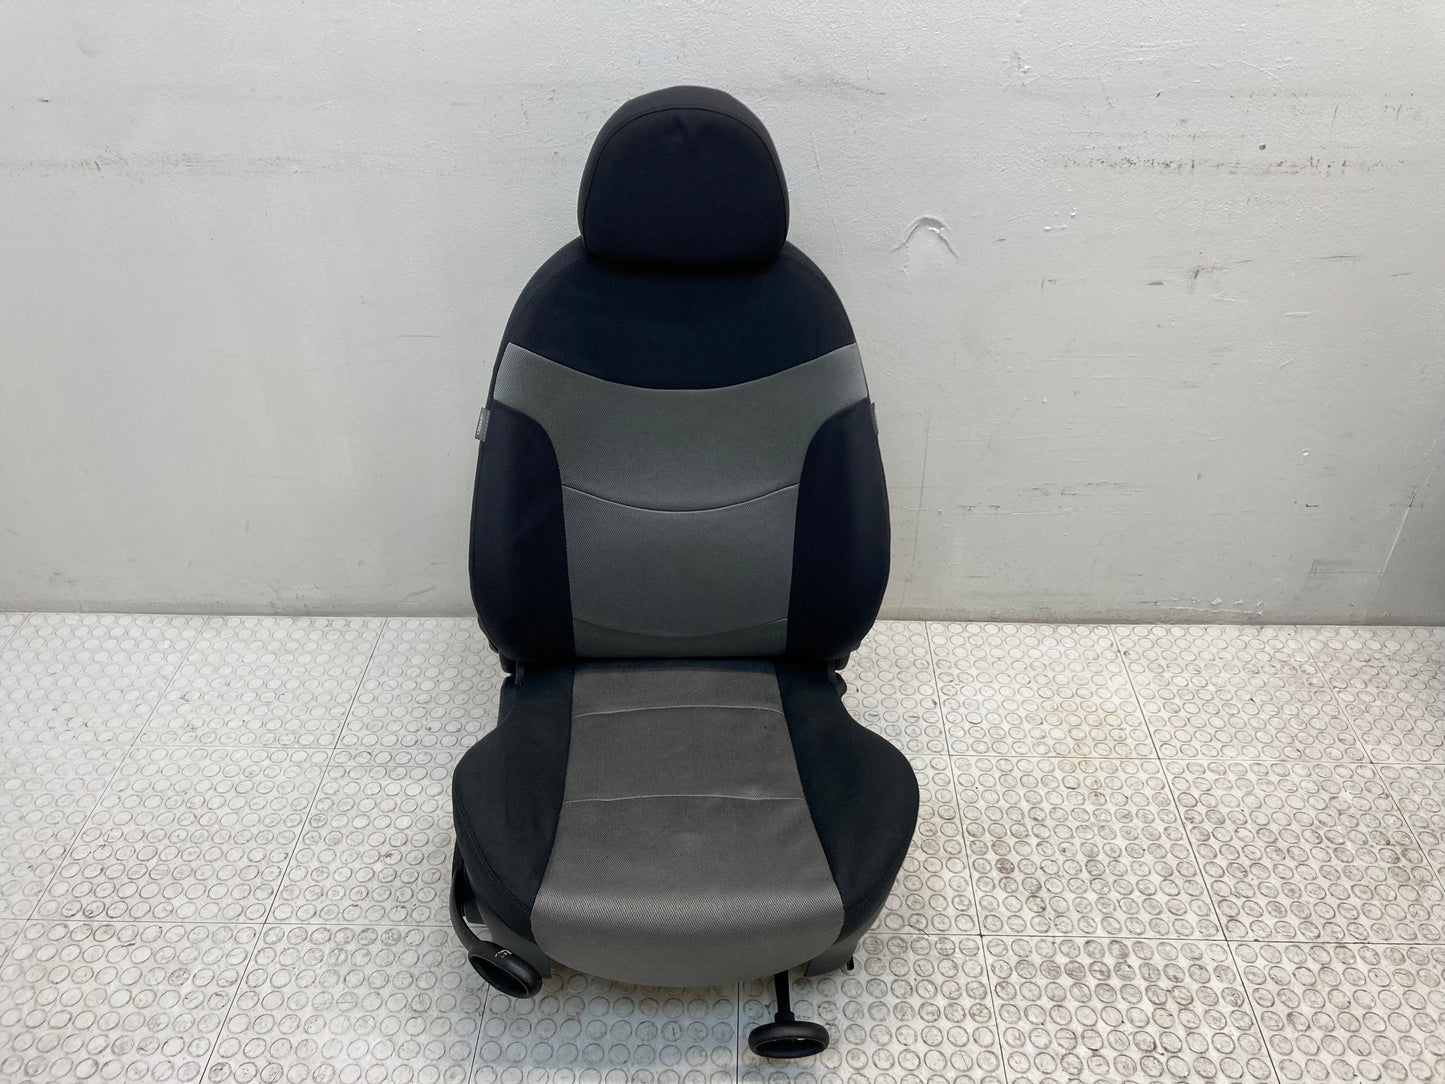 Mini Cooper Seats Fabric Space Panther Black Heated S4PN 05-06 R53 410